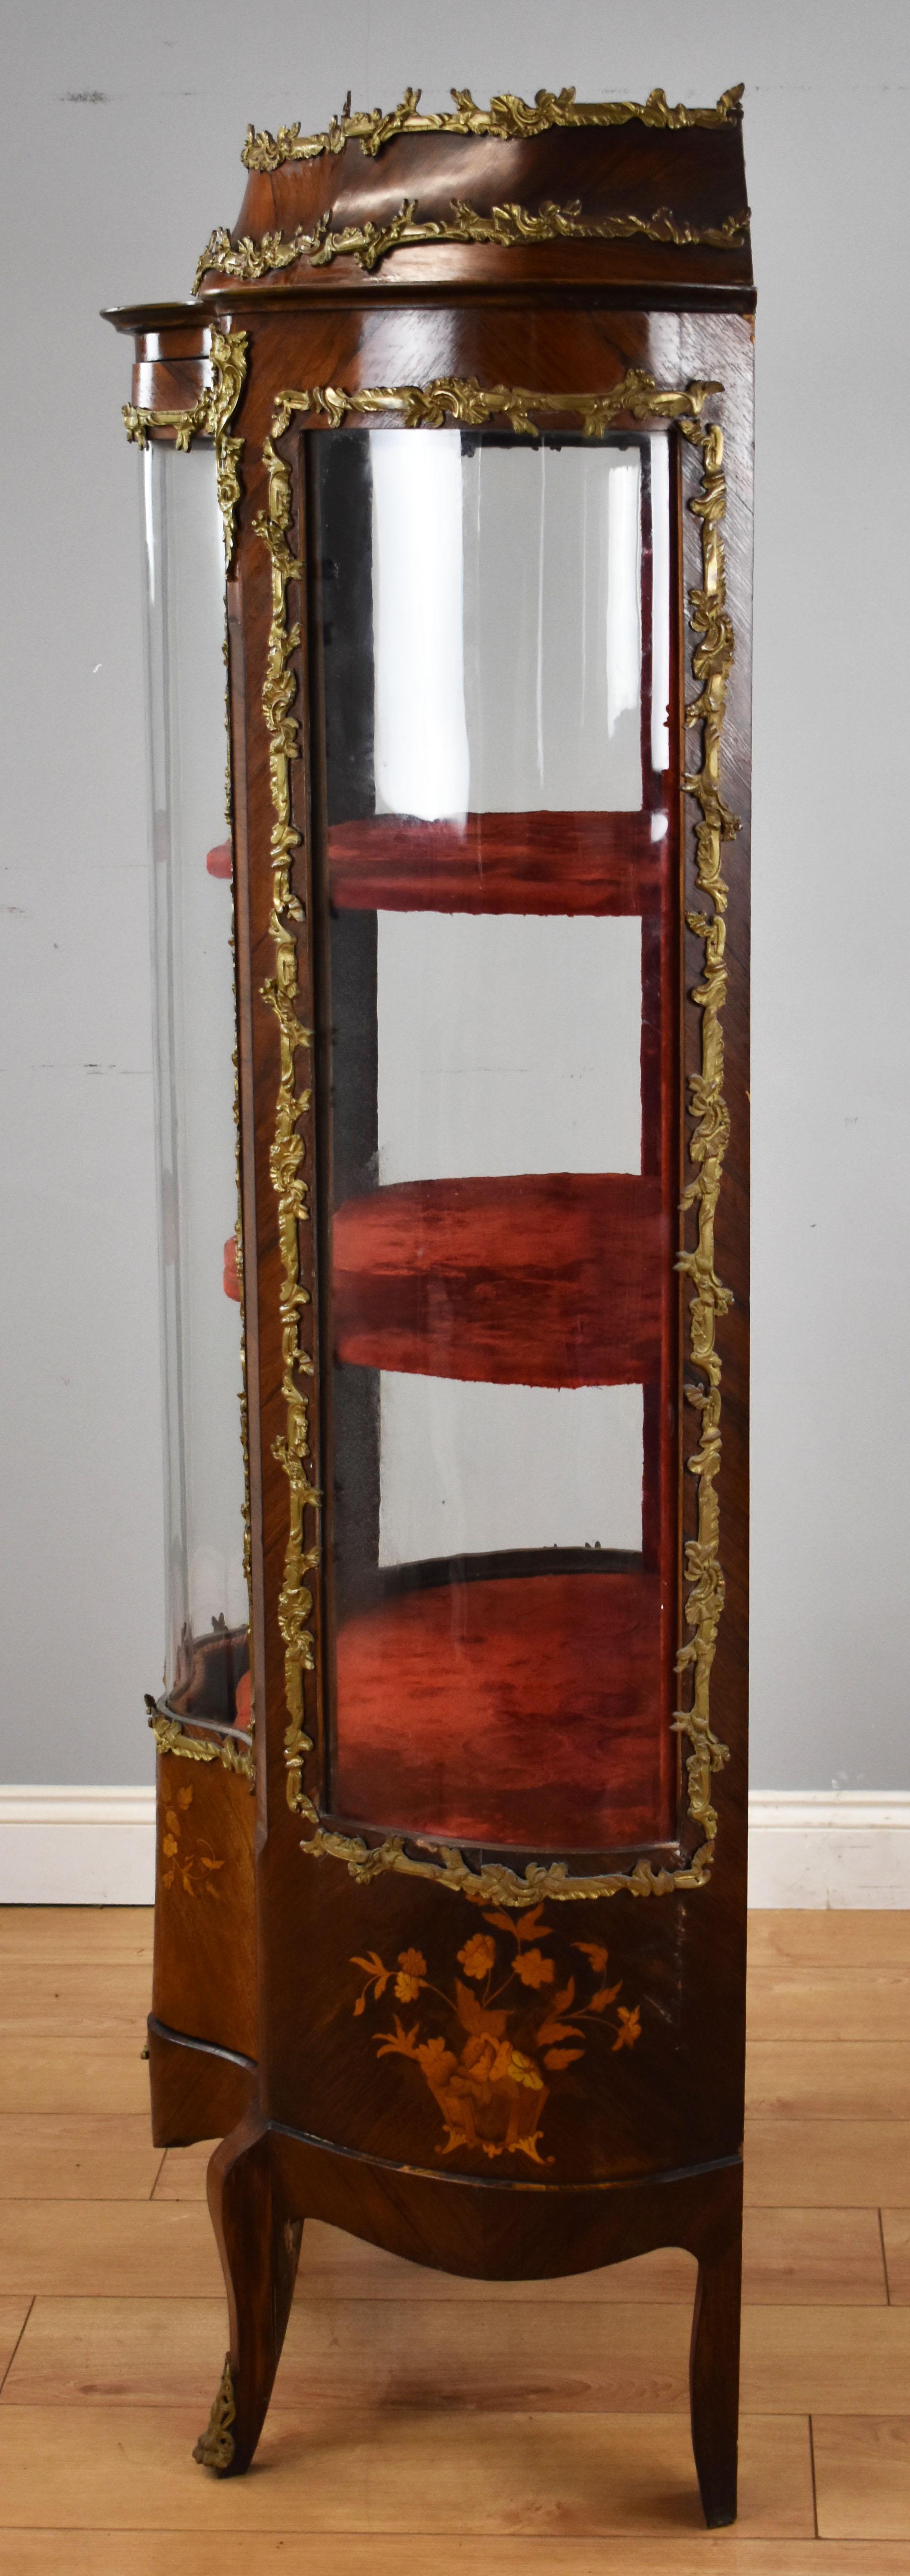 19th Century French Rosewood & Marquetry Serpentine Vitrine In Good Condition For Sale In Chelmsford, Essex